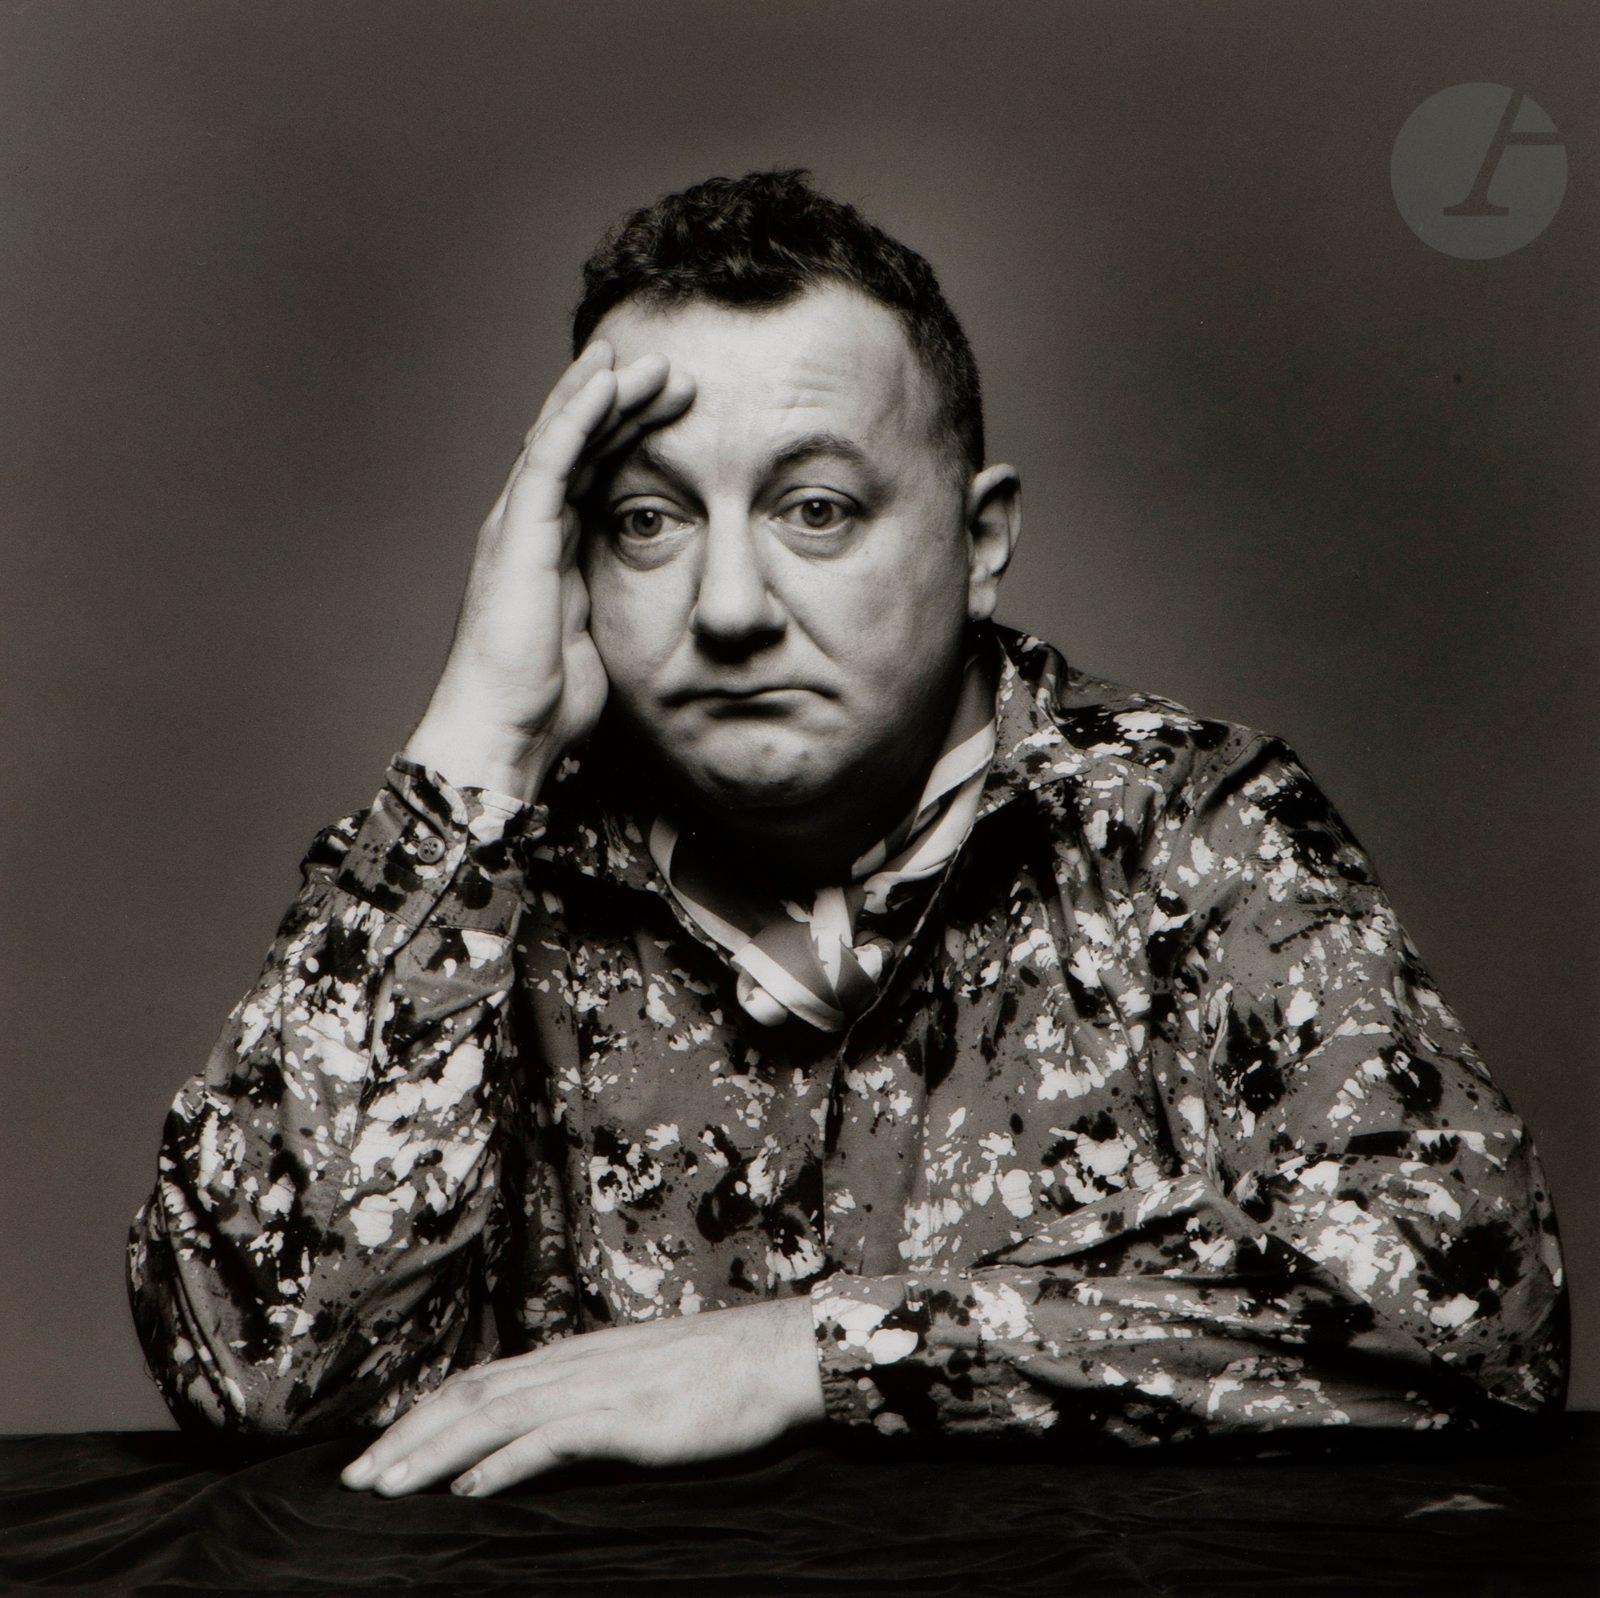 Coluche by Jean-Loup Sieff, 1985, printed c. 1980